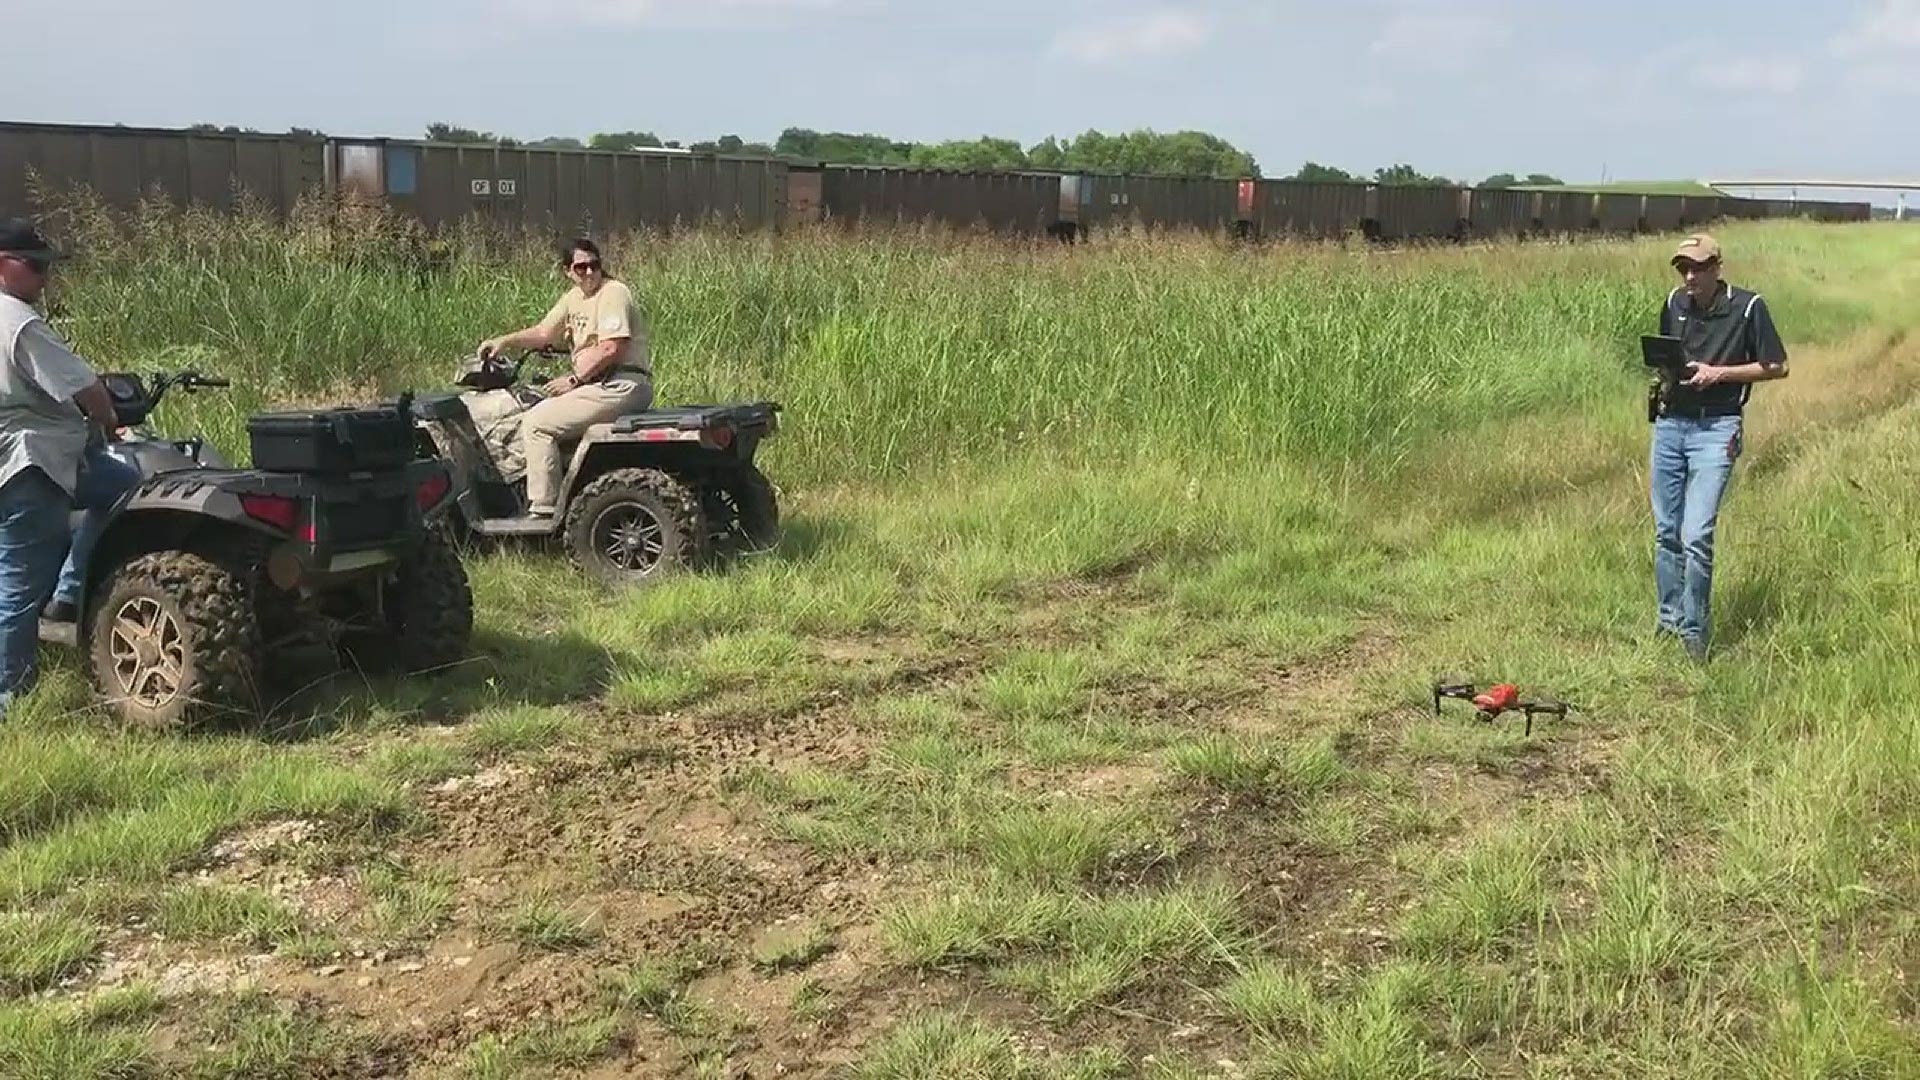 McLennan County sheriffs deputies use a drone and ATVs to look for additional evidence.
Credit: McLennan County Sheriff Department